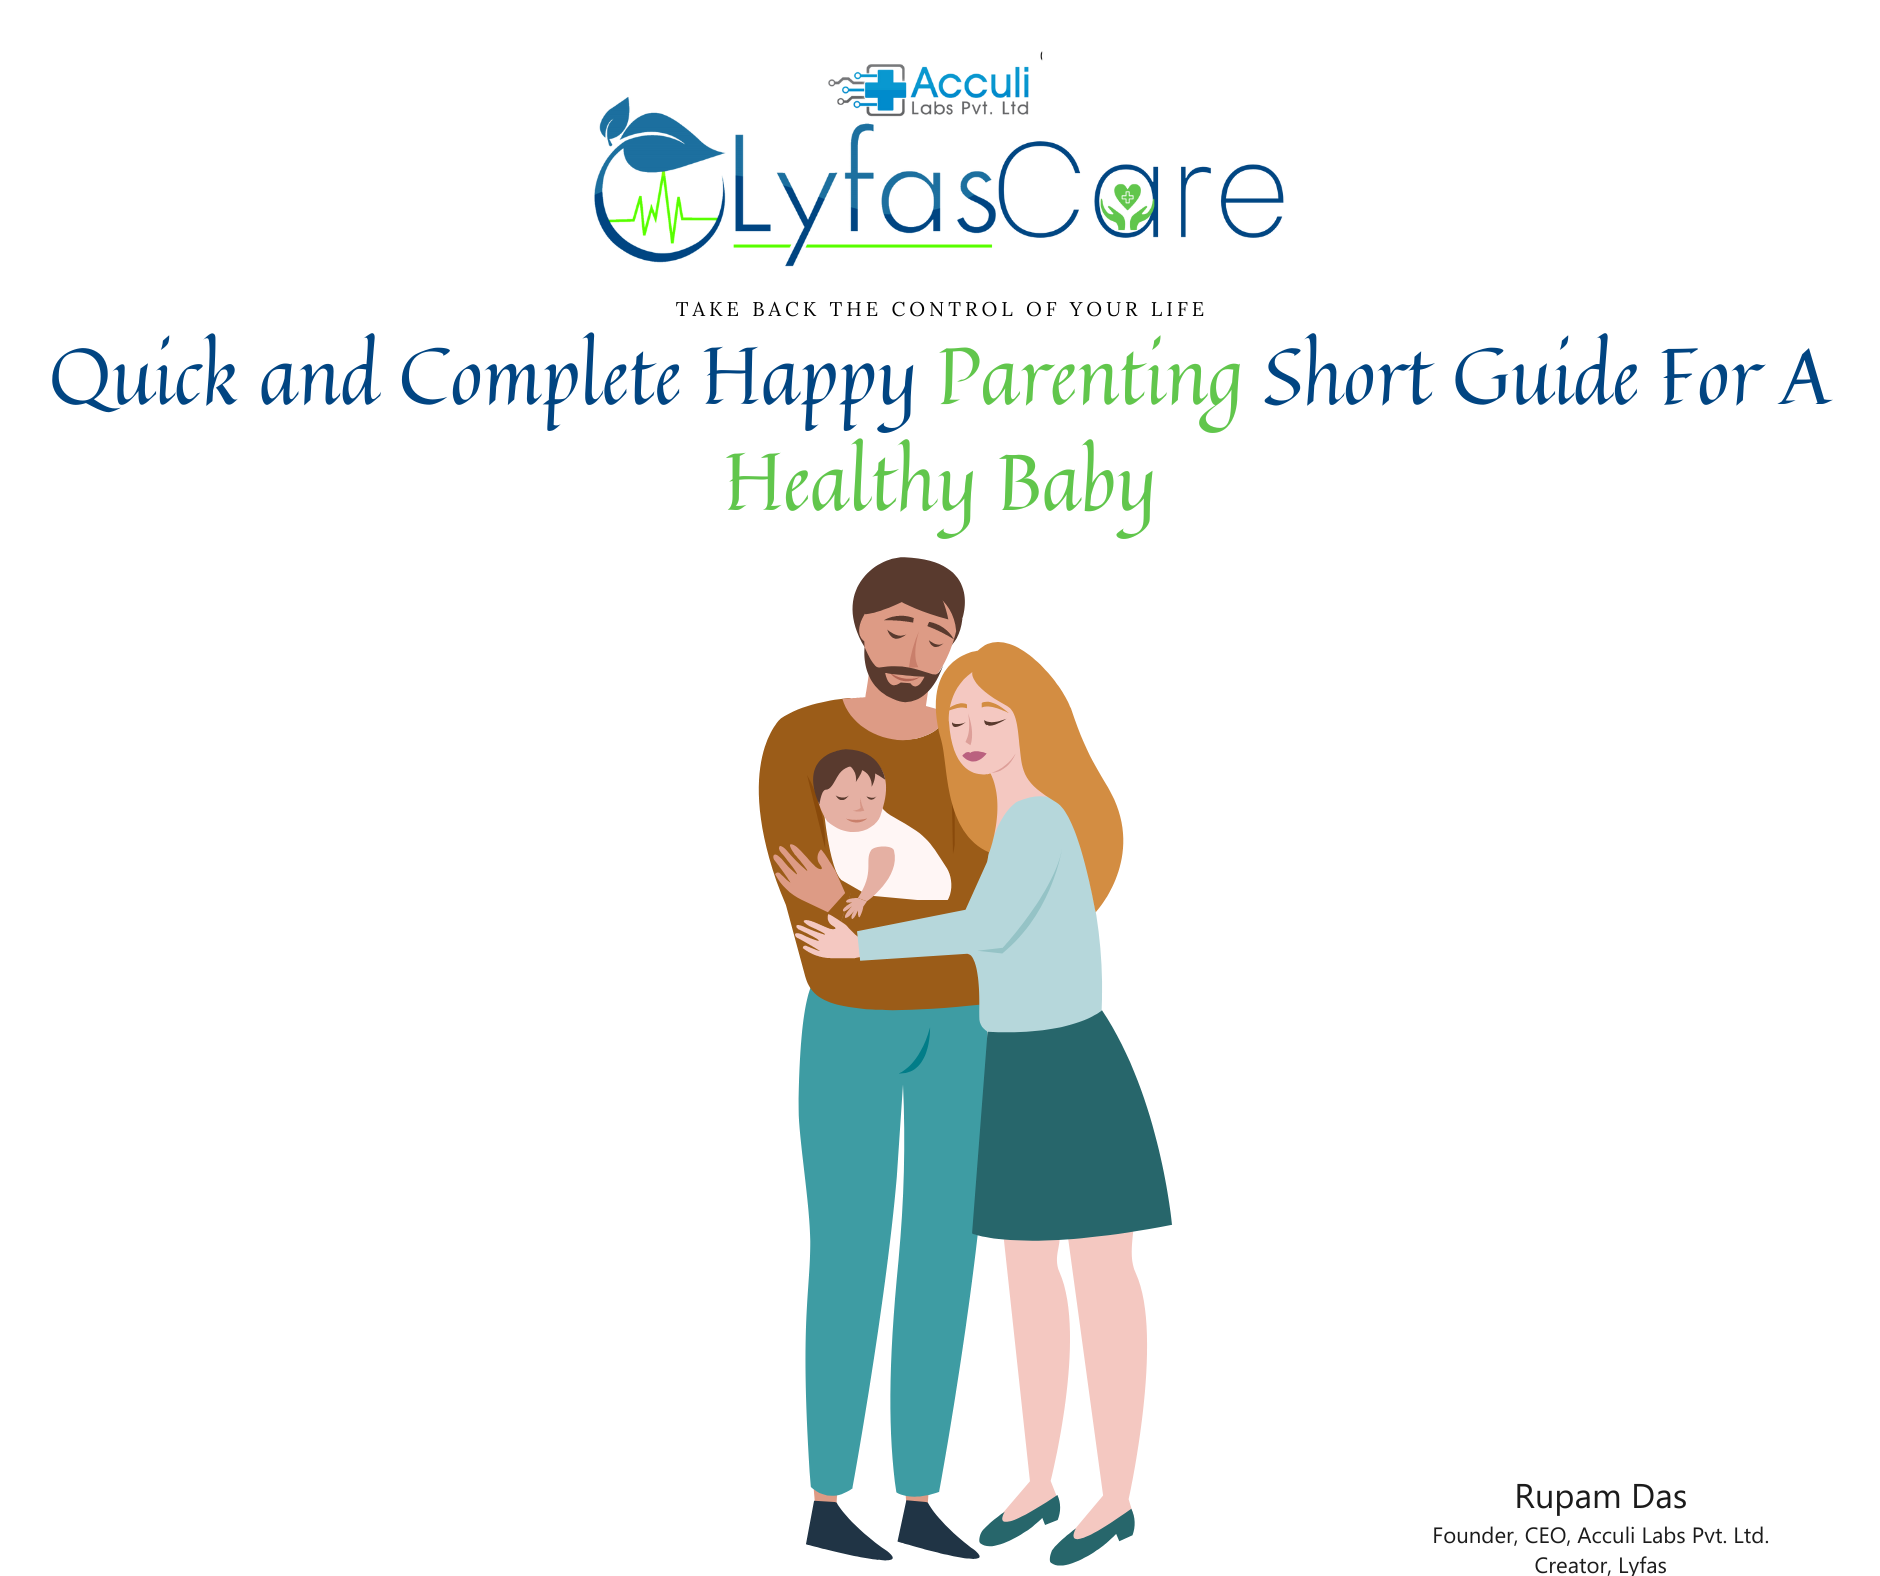 Quick and Complete Happy Parenting Short Guide For A Healthy Baby (1)